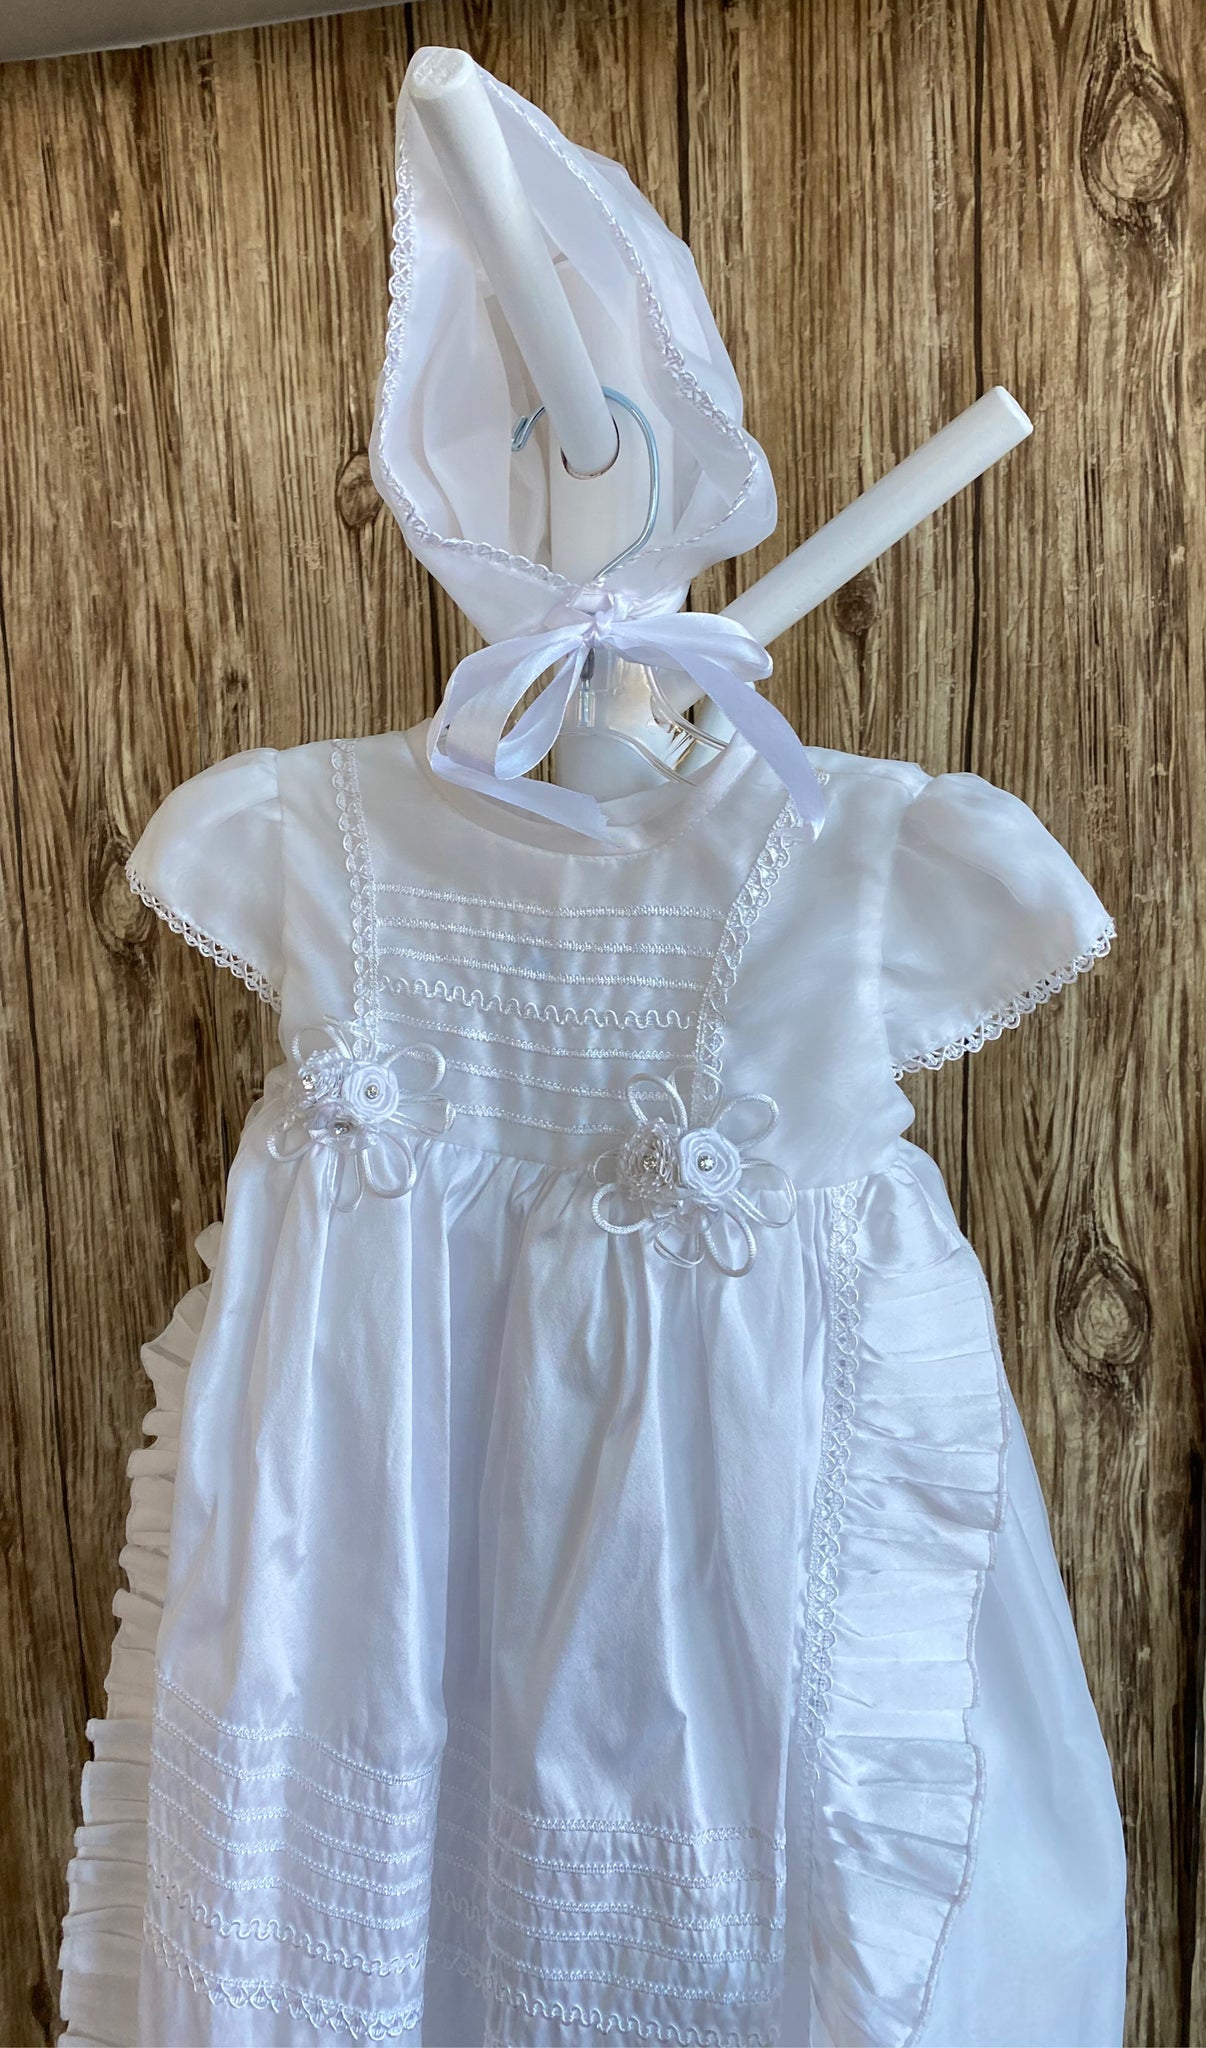 This a beautiful, one-of-a-kind baptism gown.  A lovely gown for a precious child.  White, size 12M Cropped satin bodice Embroidered detailing on bodice Two flowered bouquets on edging of bodice Satin cap sleeve with hand stitching along edge Long layered skirting Embroidered striping detailing on top layer of skirt Ruffled edge along skirt layers Satin bonnet with hand stitched edging Ribbon closure to tie around the head